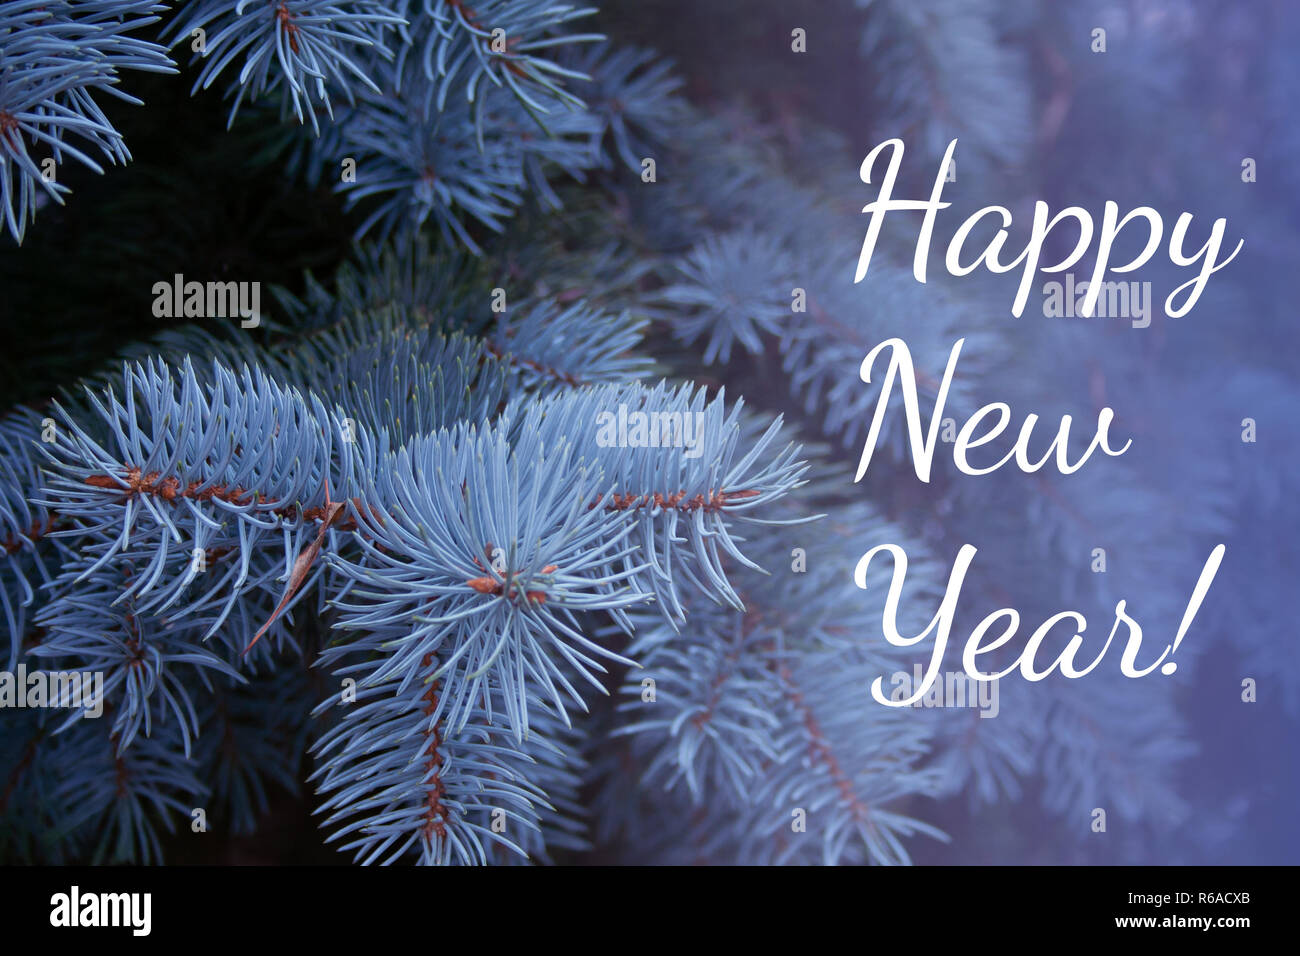 Blue spruce branches with text. Winter is coming Stock Photo